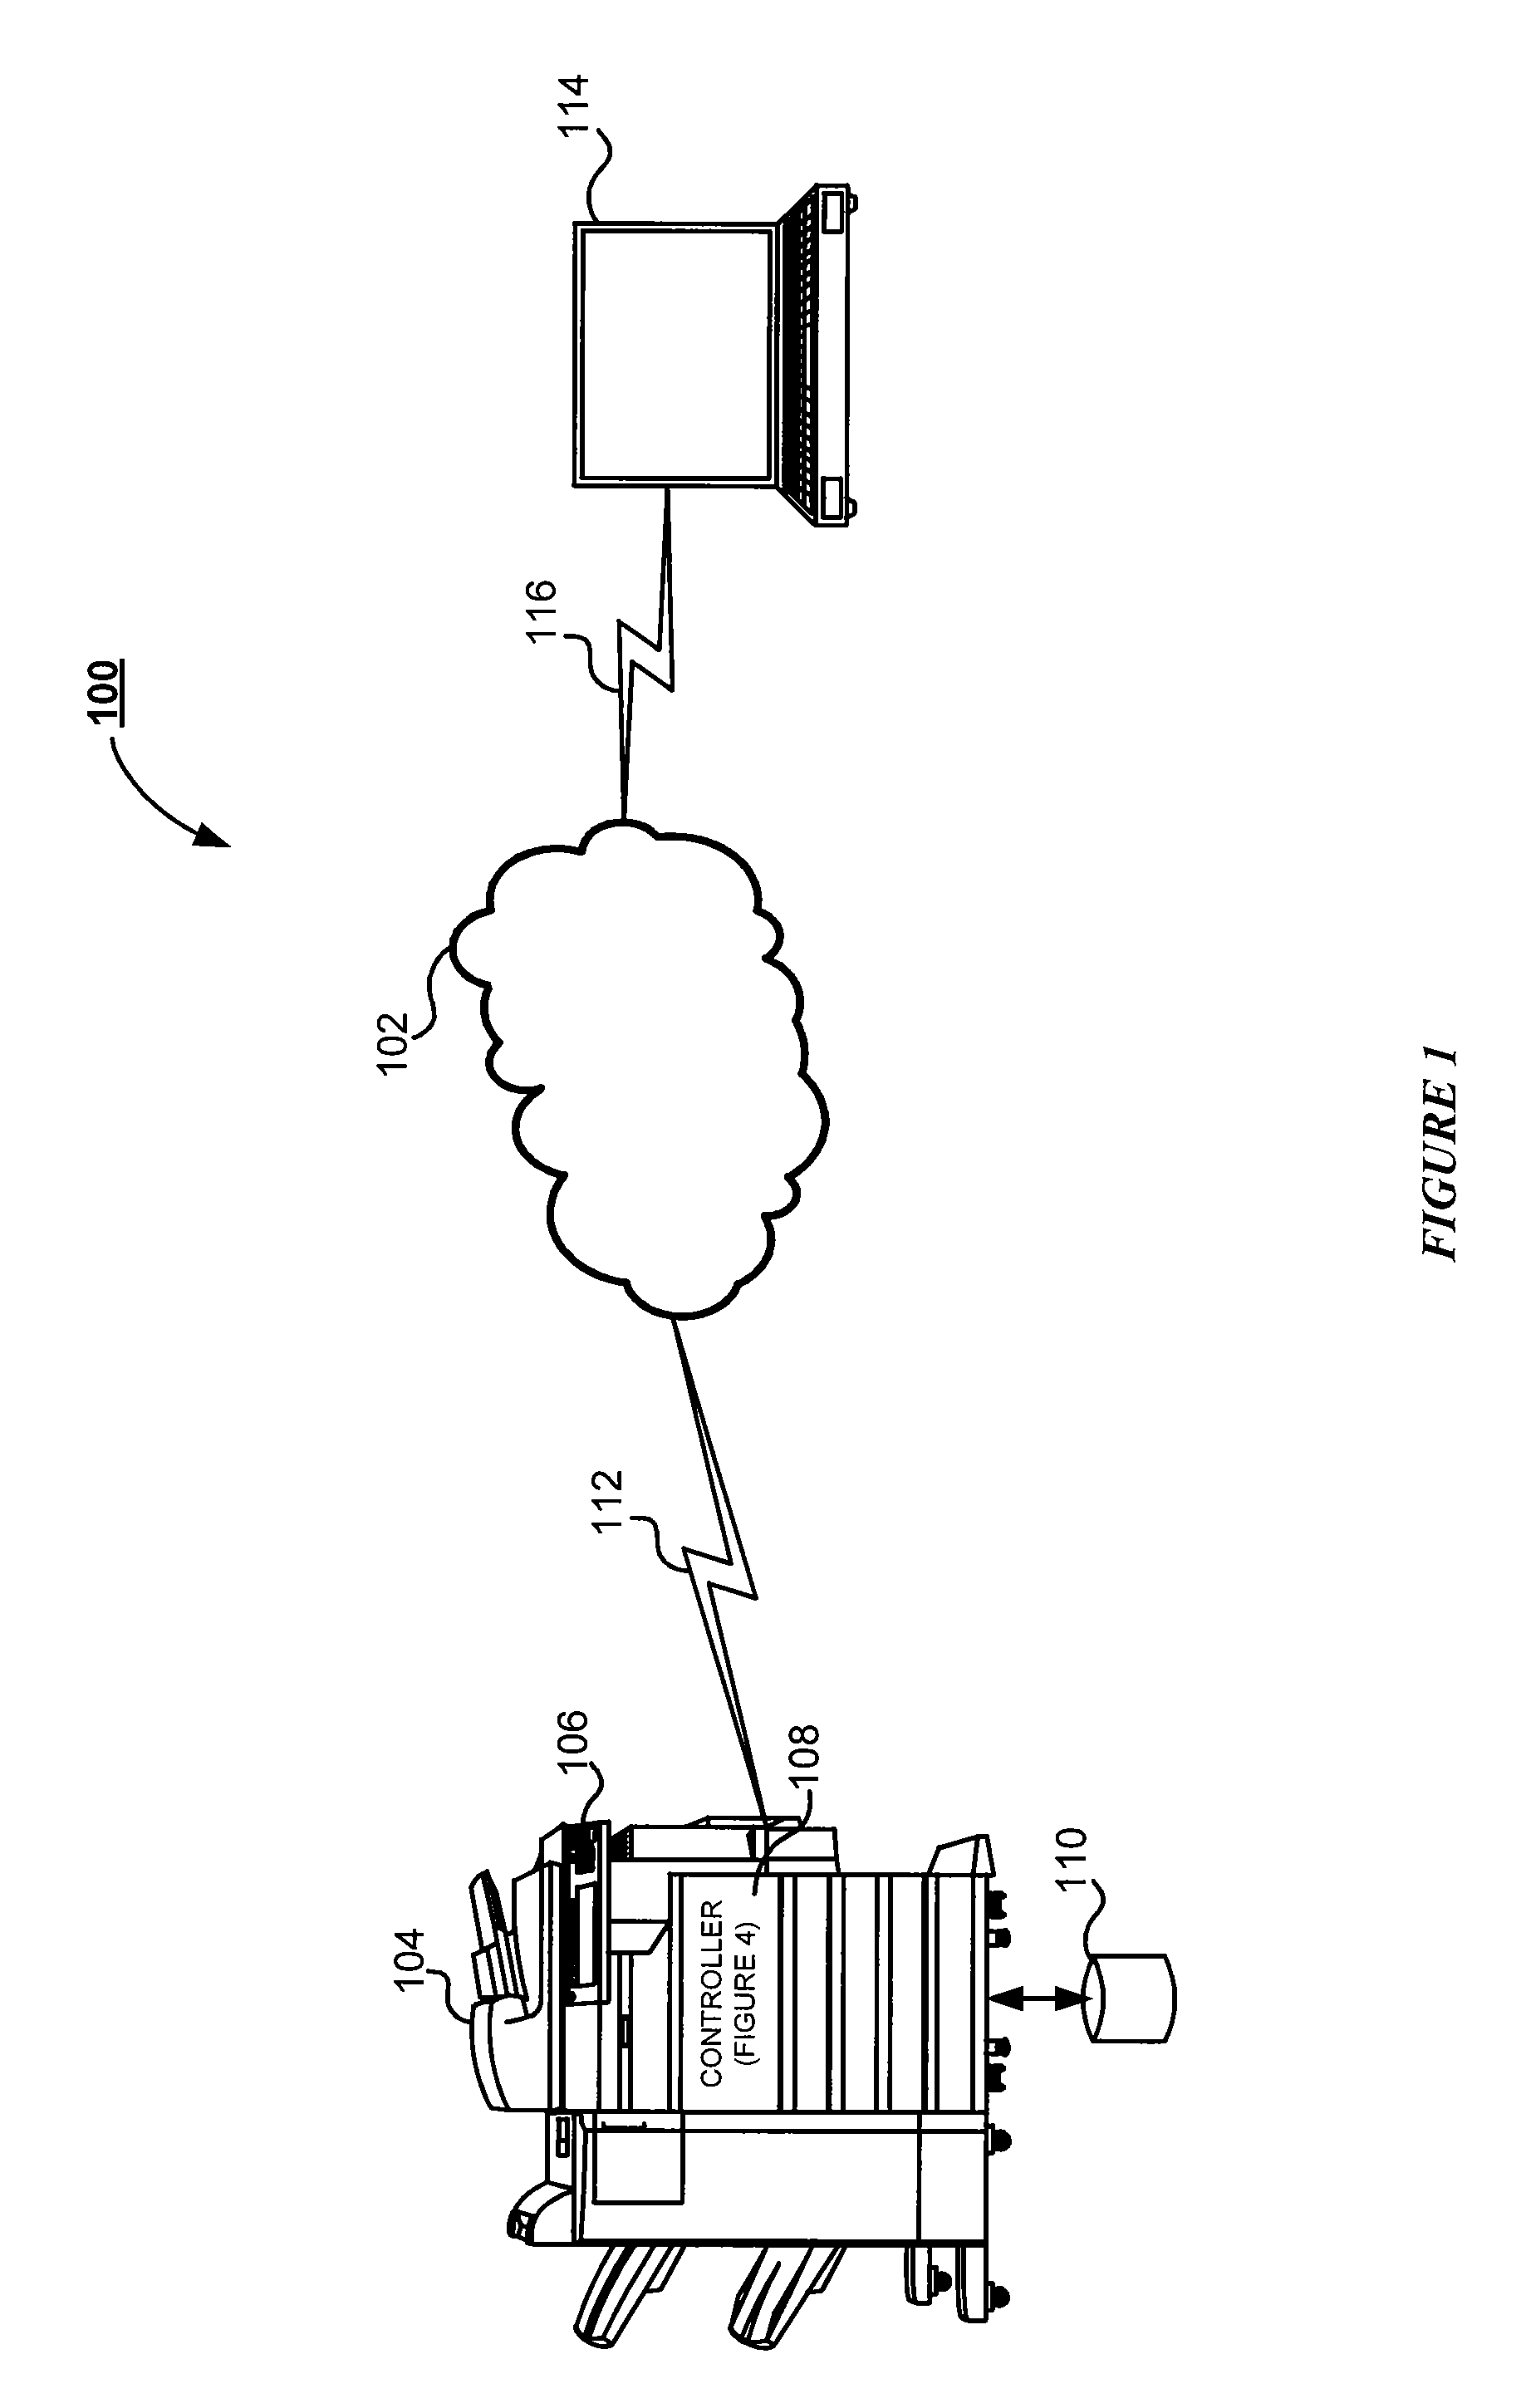 System and method for generating documents from multiple image overlays